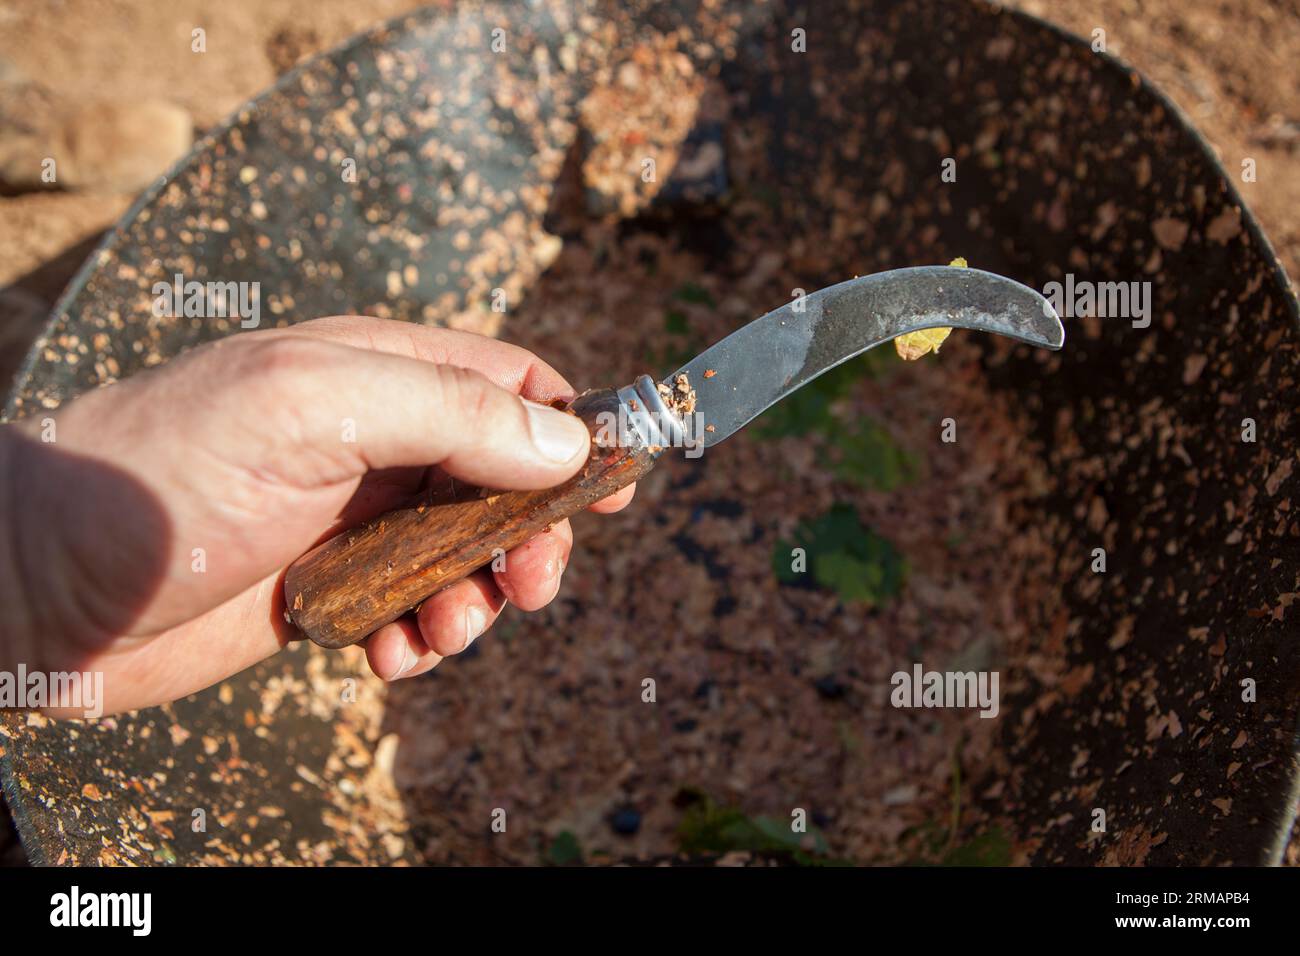 Grape picker holds special curved knife for harvesting and grafting. Empty harvesting bucket at bottom Stock Photo